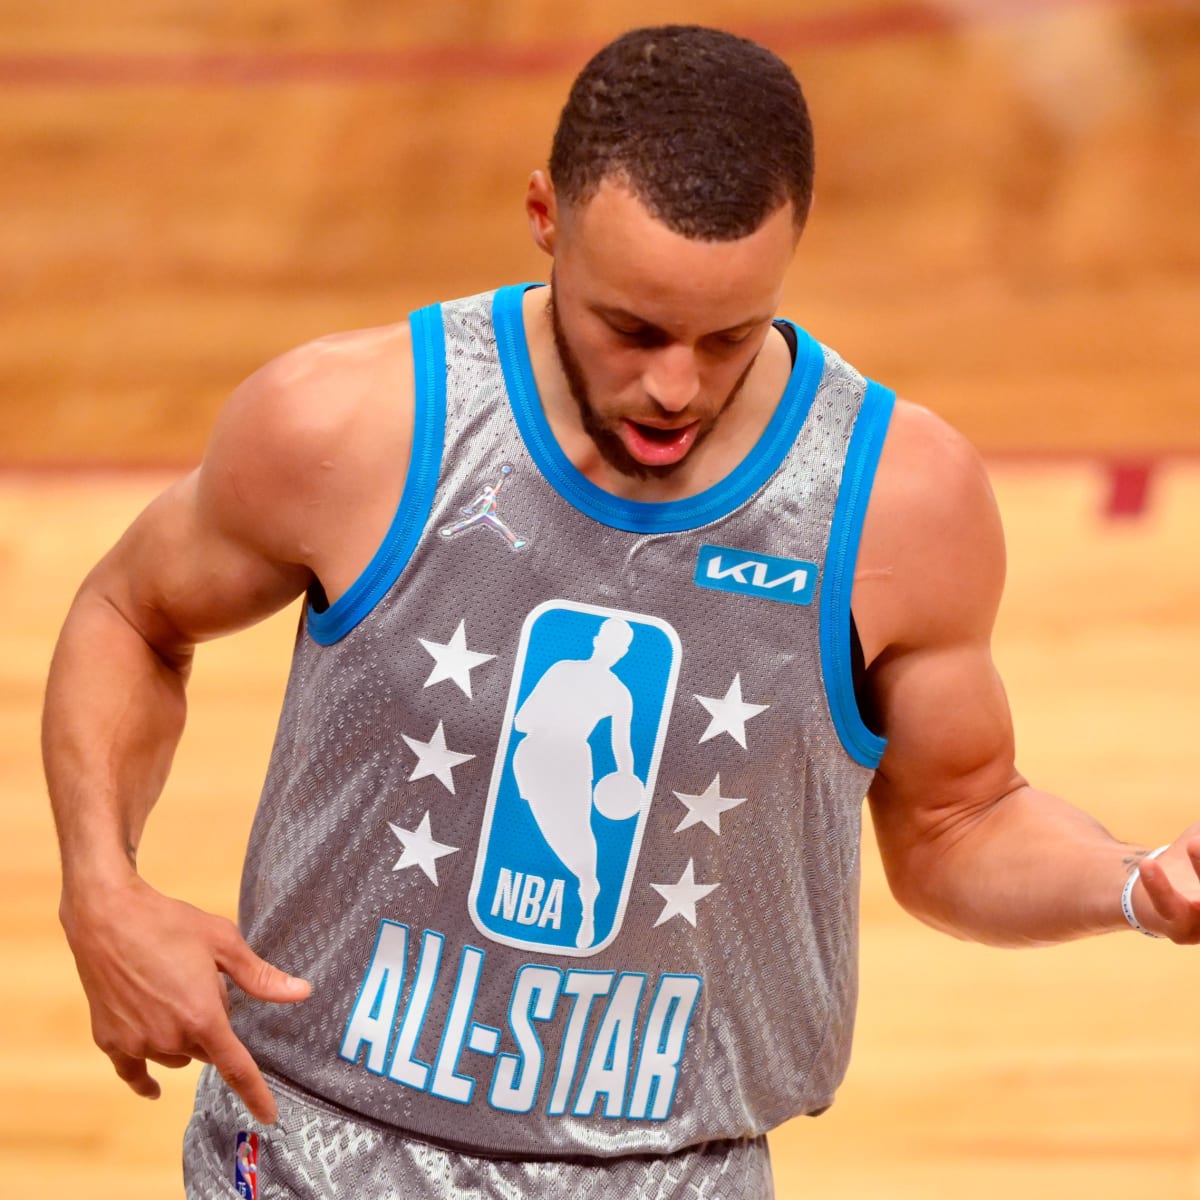 Golden State Warriors: Could Stephen Curry win All-Star Game MVP?